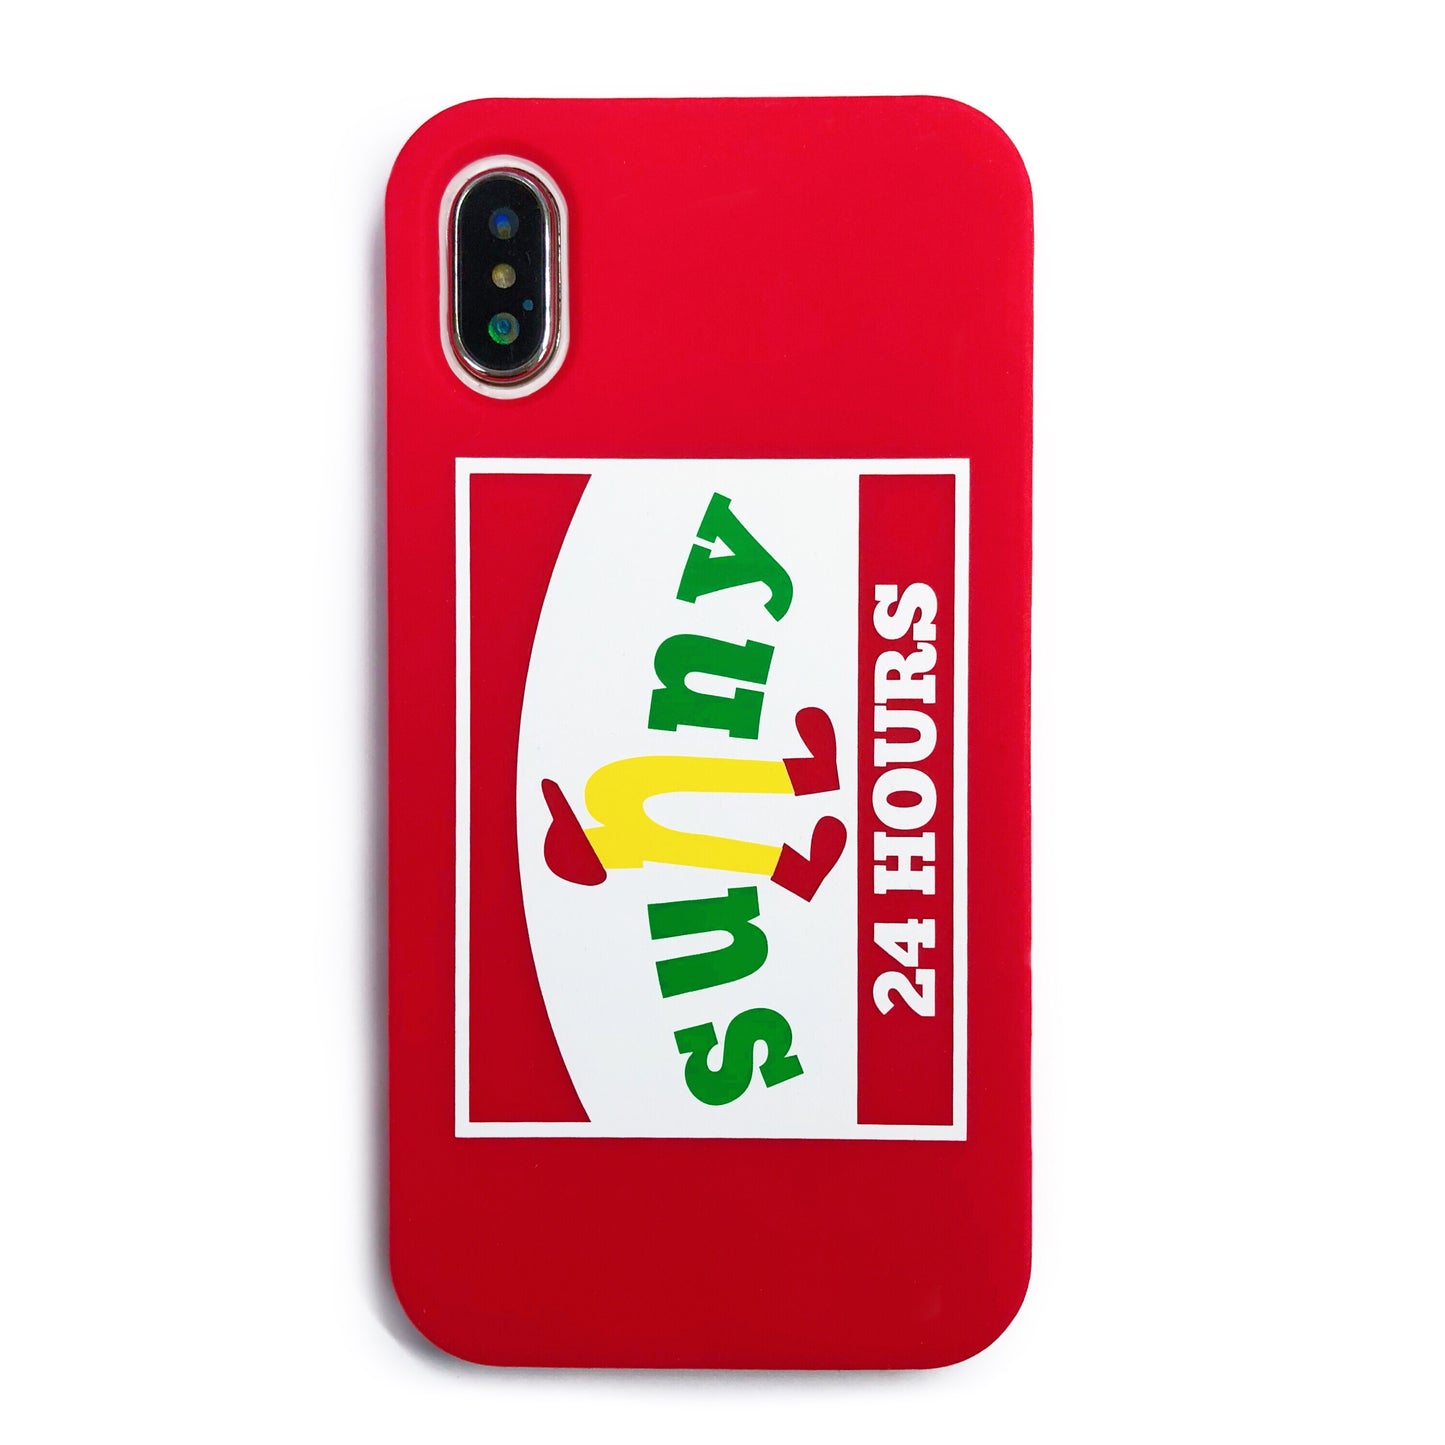 iPhone X/Xs Parody Simple Case - Sunny 24 Hours